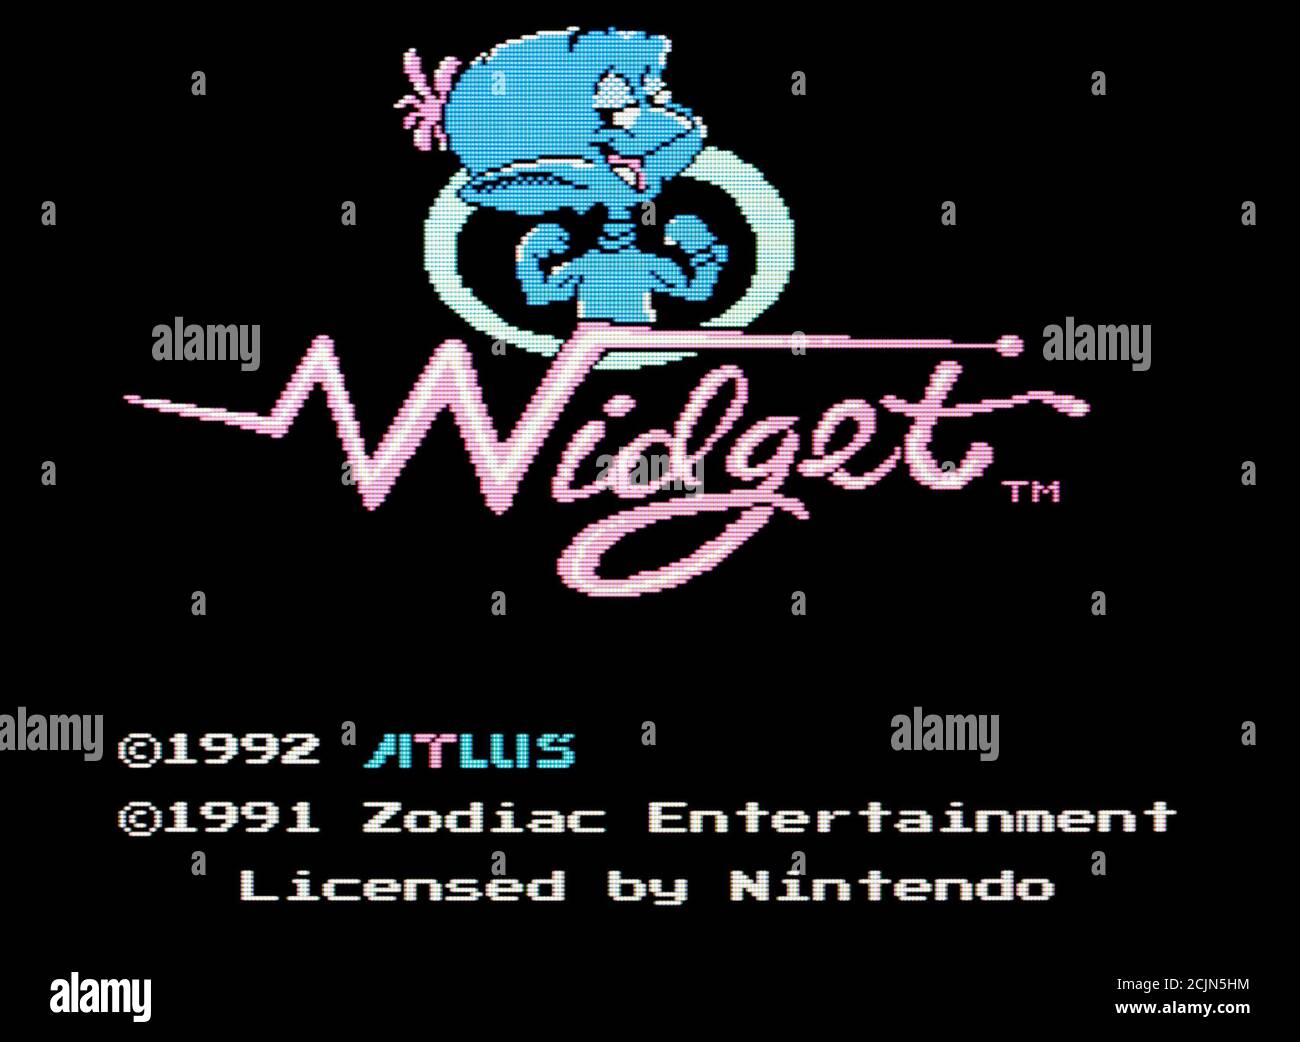 Widget - Nintendo Entertainment System - NES Videogame - Editorial use only Stock Photo